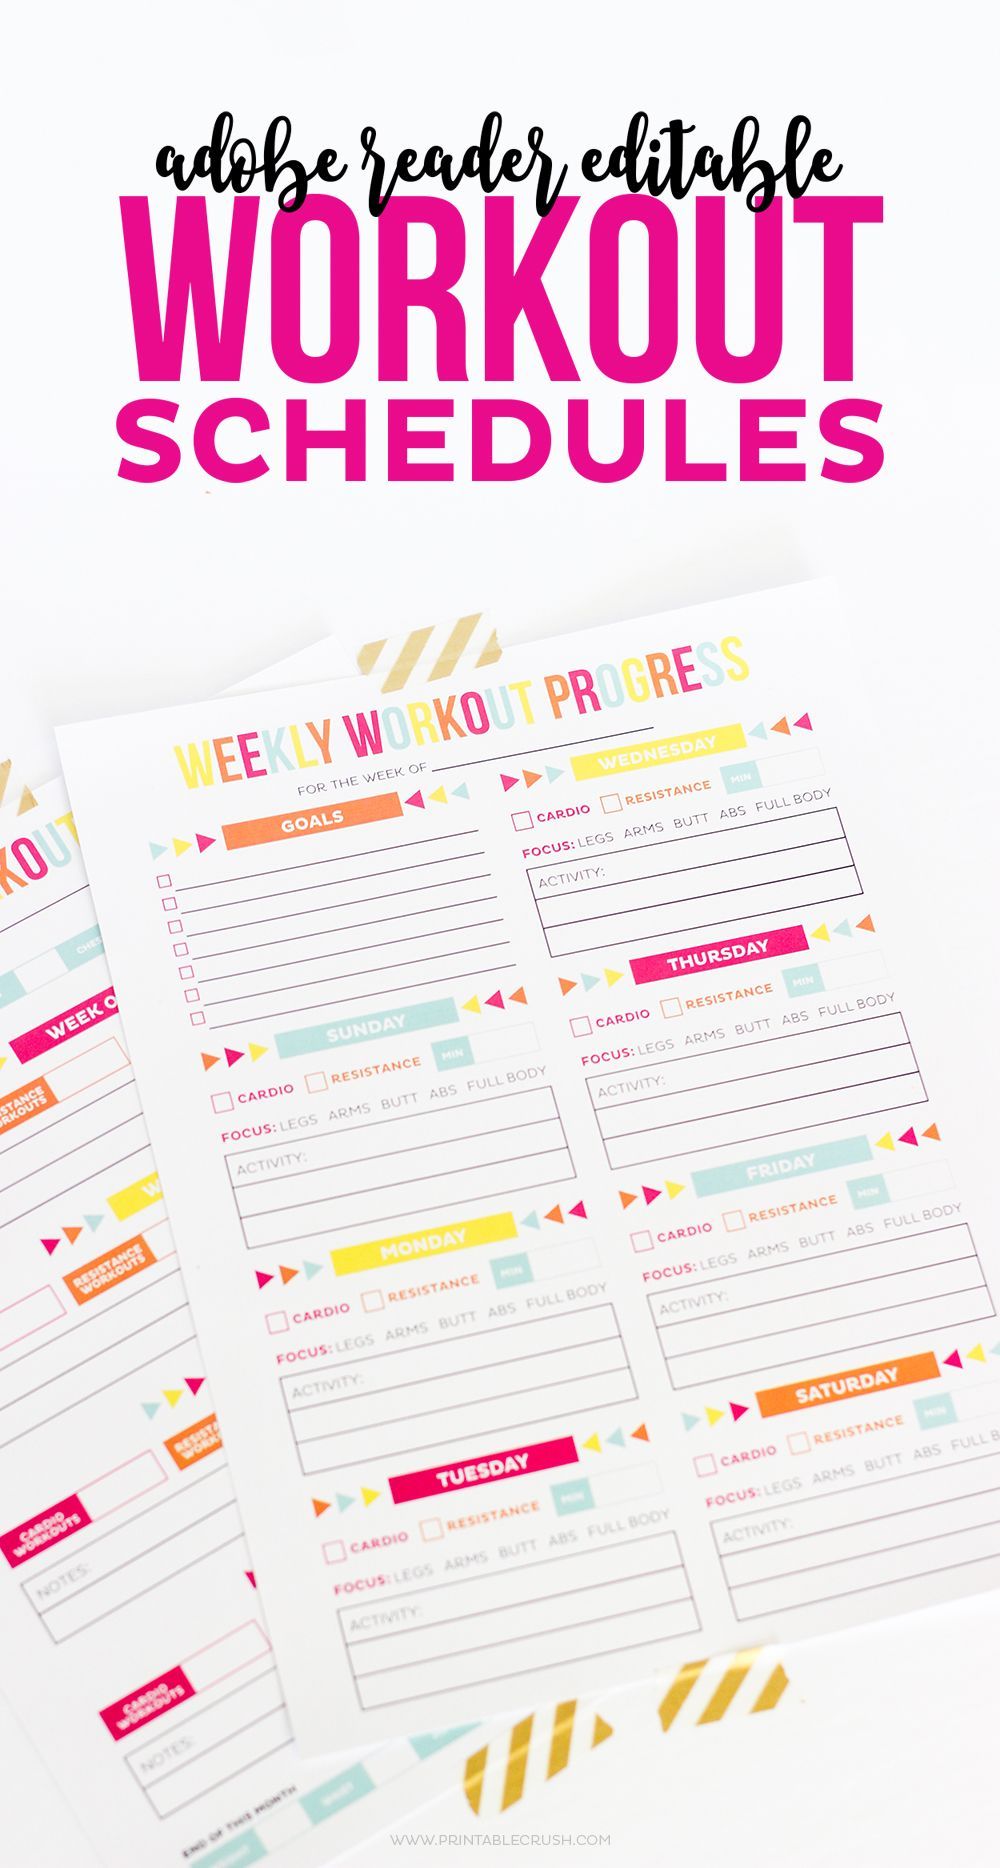 Editable Printable Workout Schedule -   18 fitness Routine planner ideas